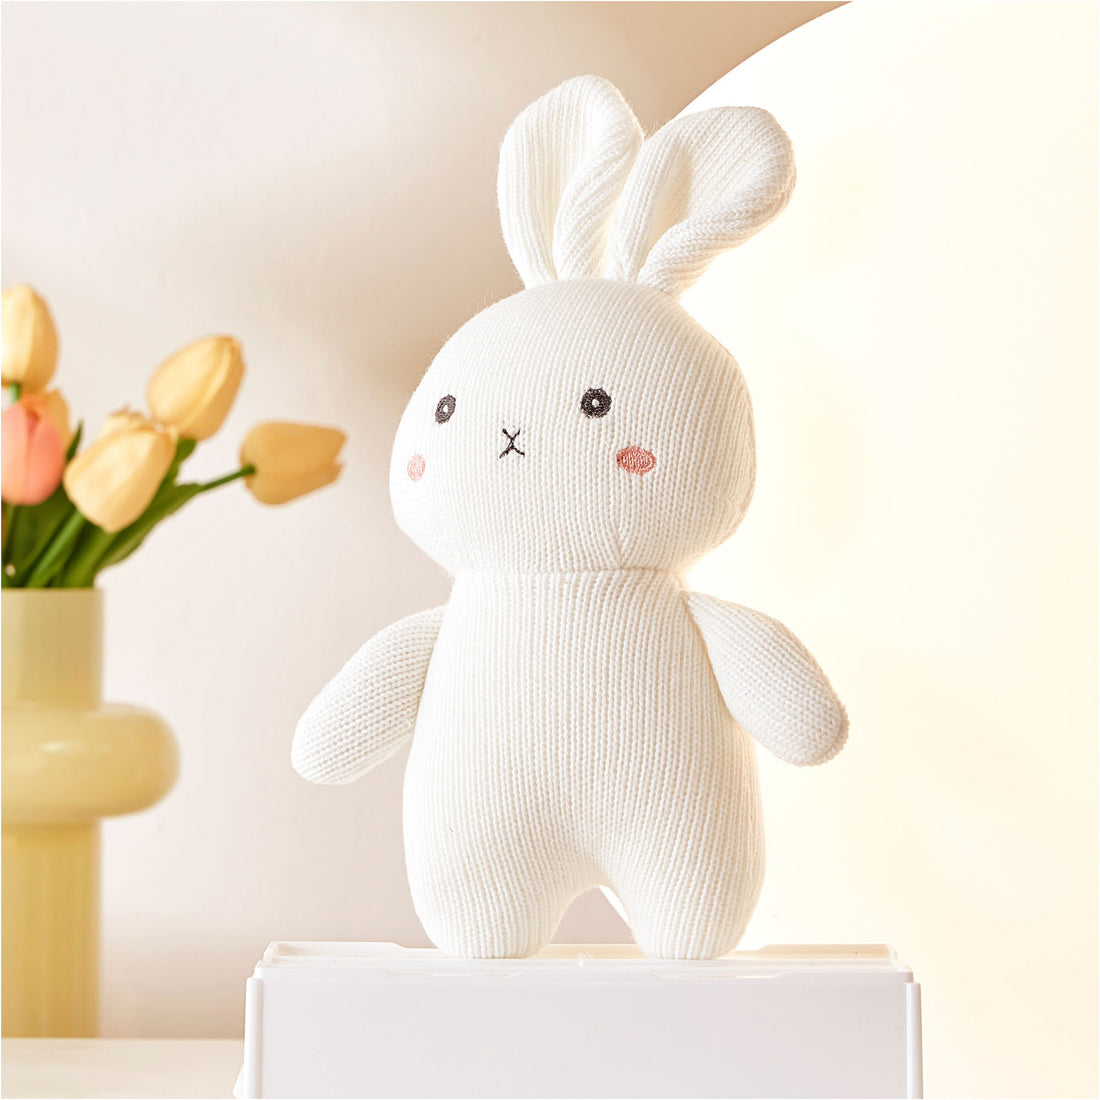 A white stuffed rabbit sitting on a white shelf. The rabbit has floppy ears and a pink cheek.